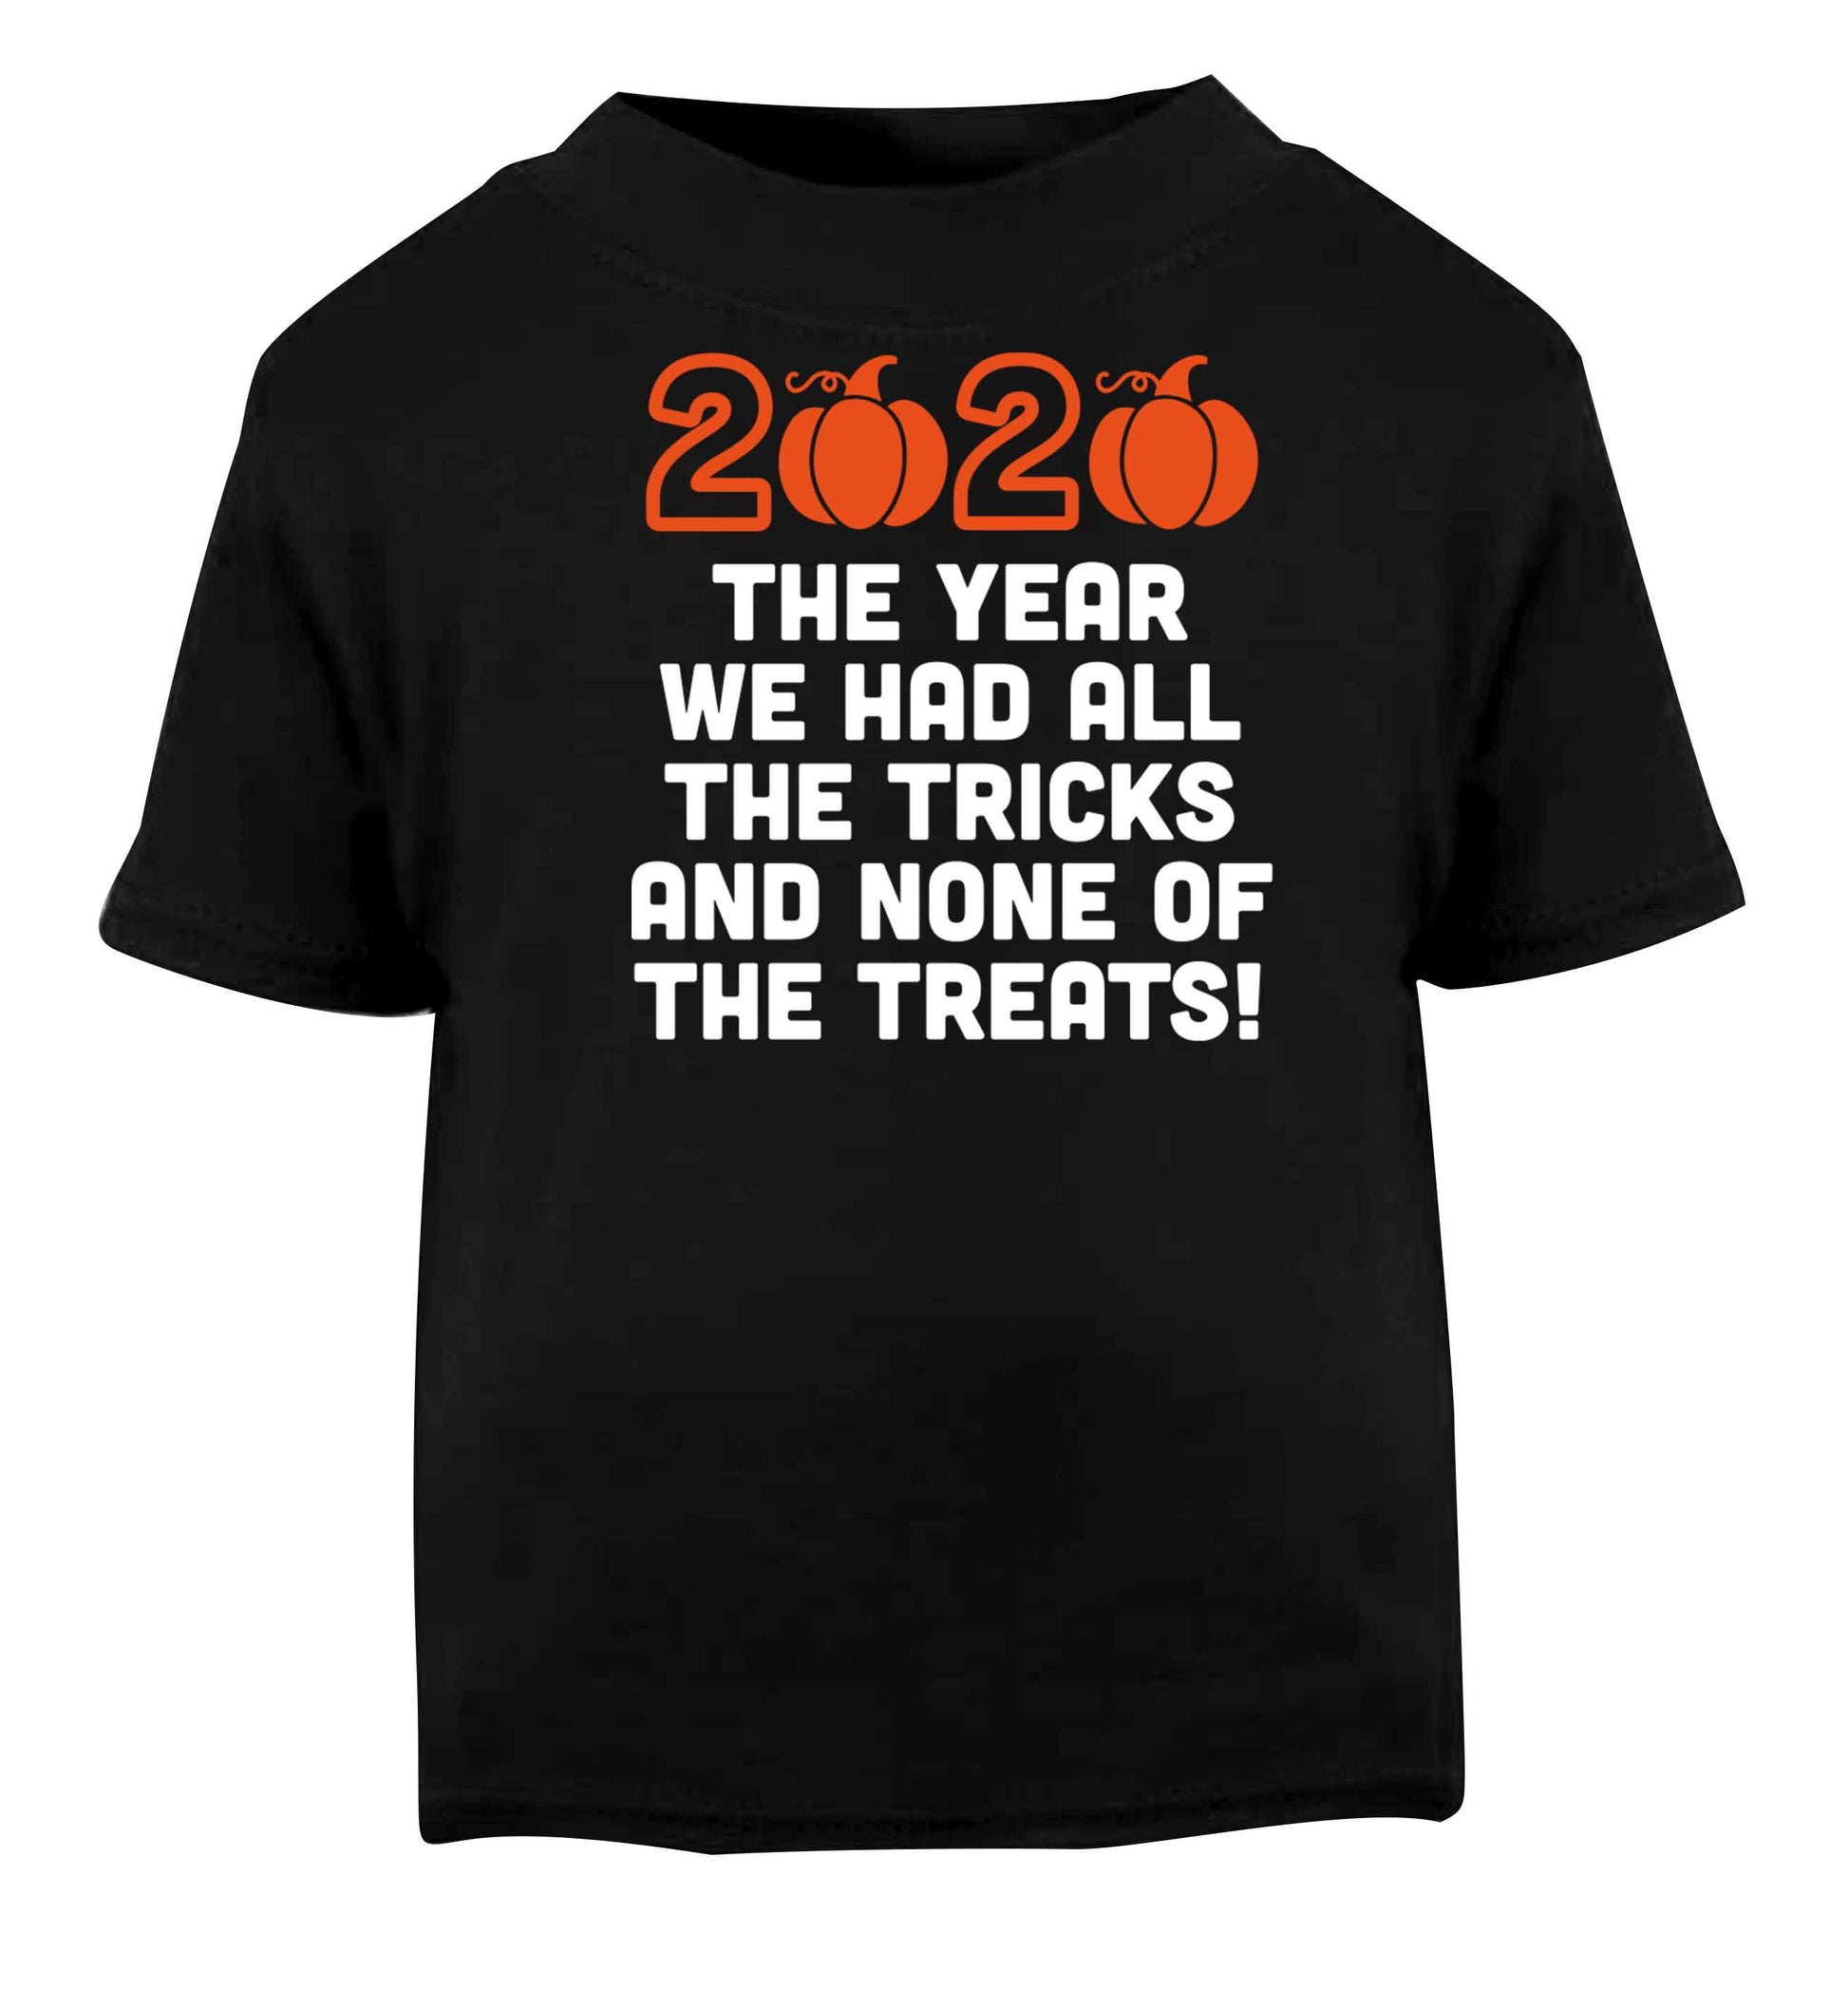 2020 The year we had all of the tricks and none of the treats Black baby toddler Tshirt 2 years